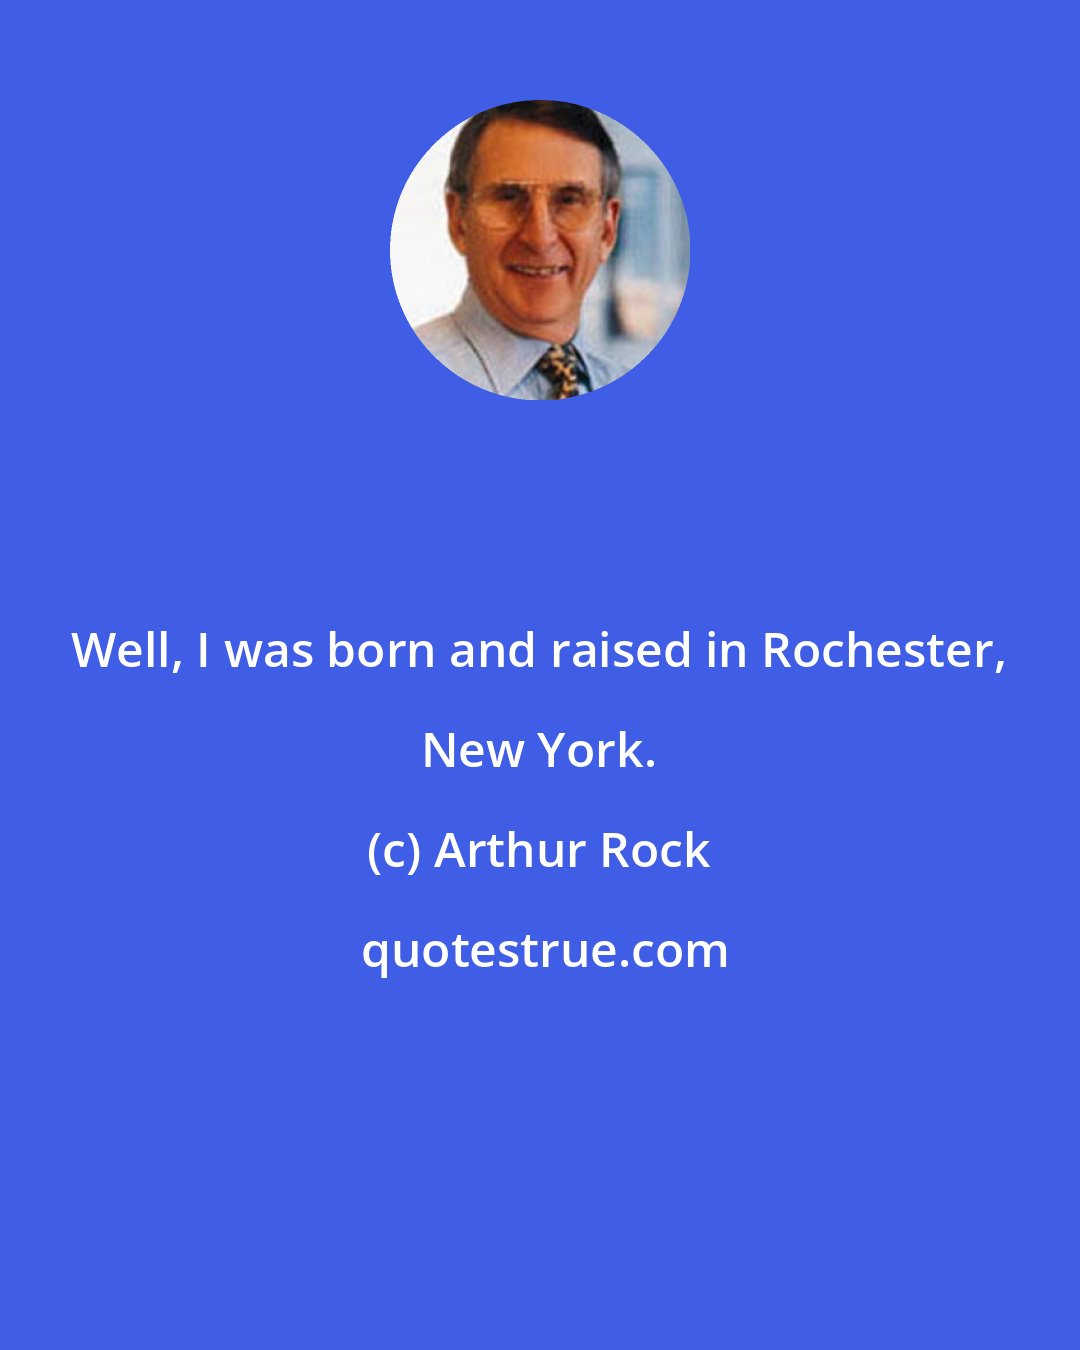 Arthur Rock: Well, I was born and raised in Rochester, New York.